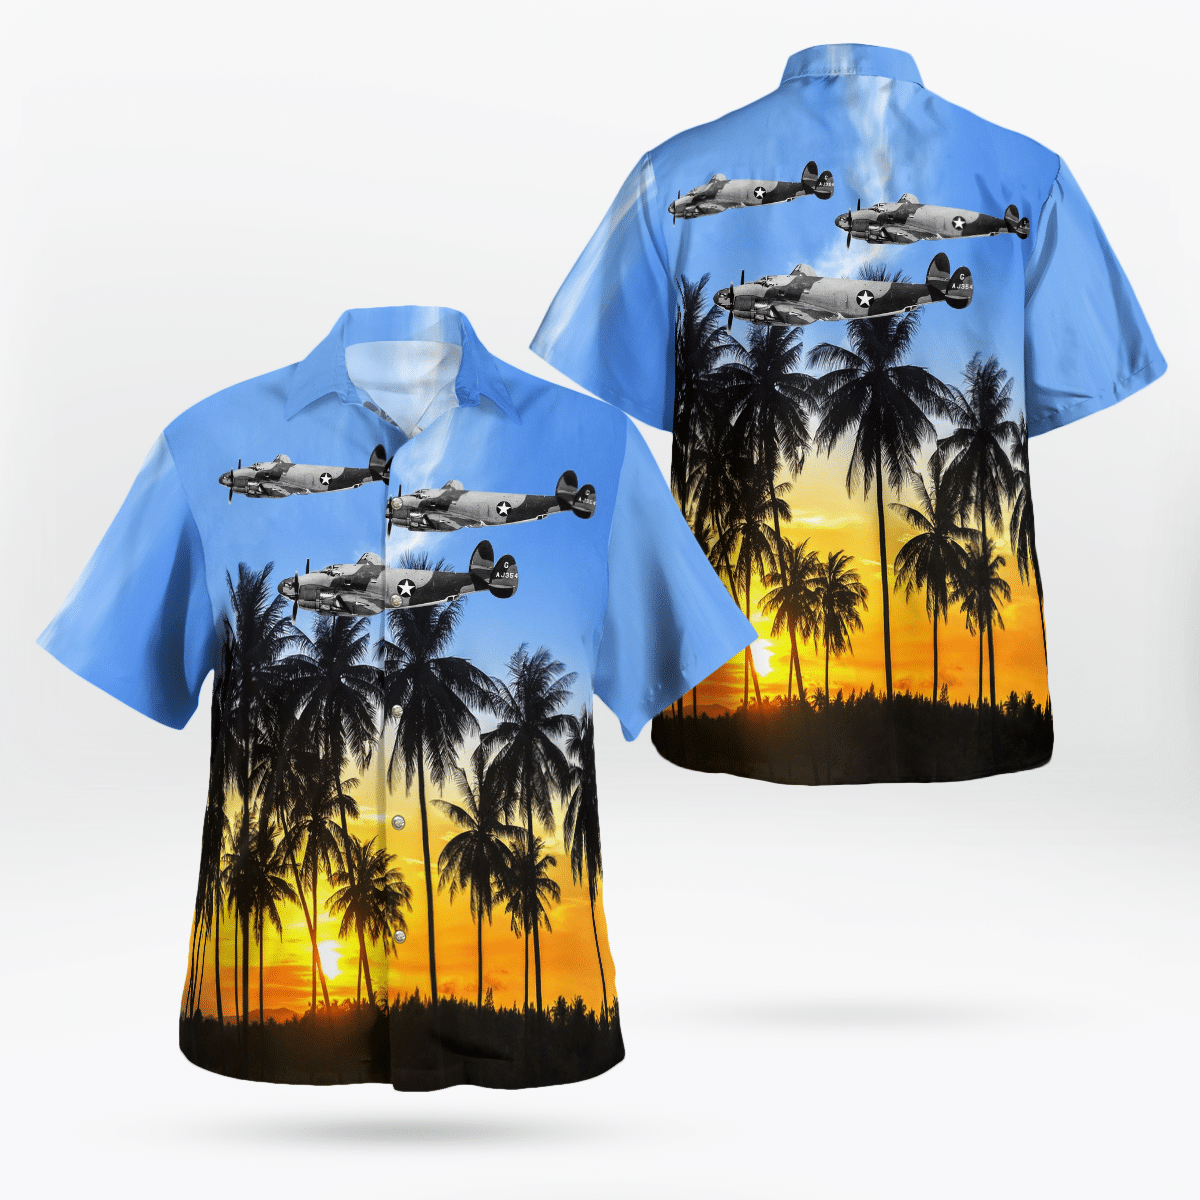 Shop now to find the perfect Hawaii Shirt for your hobby 88